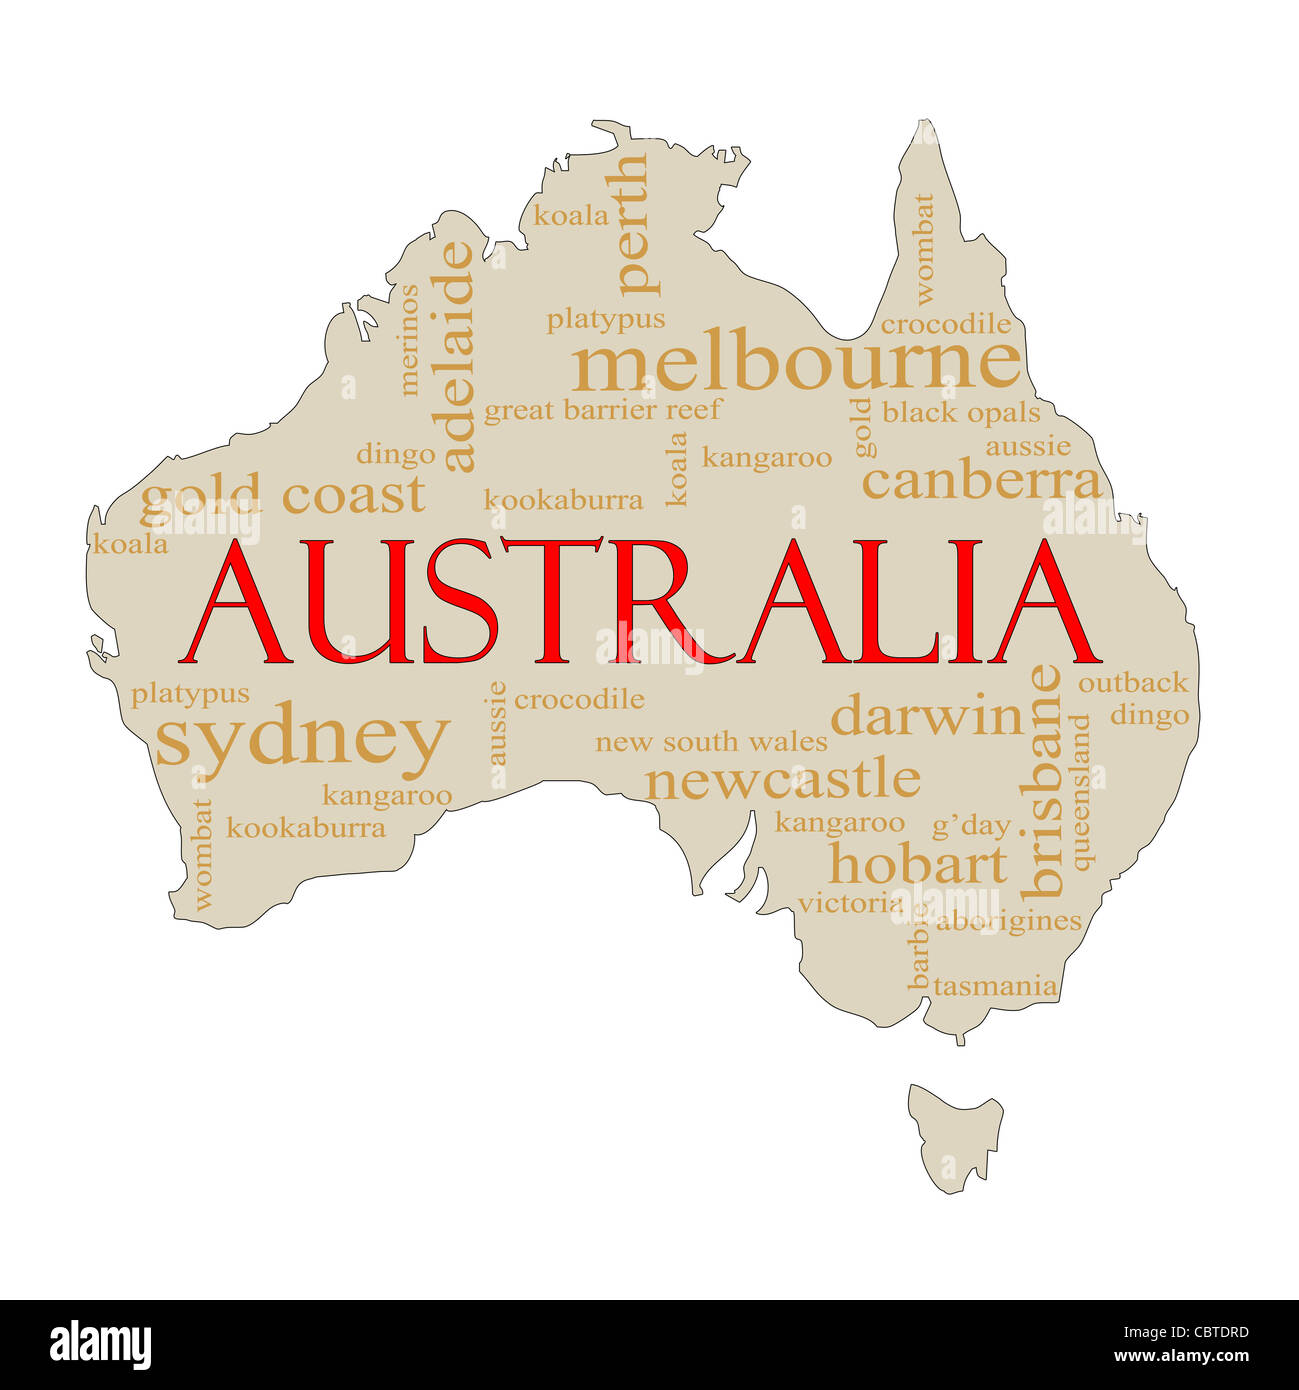 A map of Australia with different Australian terms around it such as Melbourne, Canberra, kangaroo and more. Stock Photo